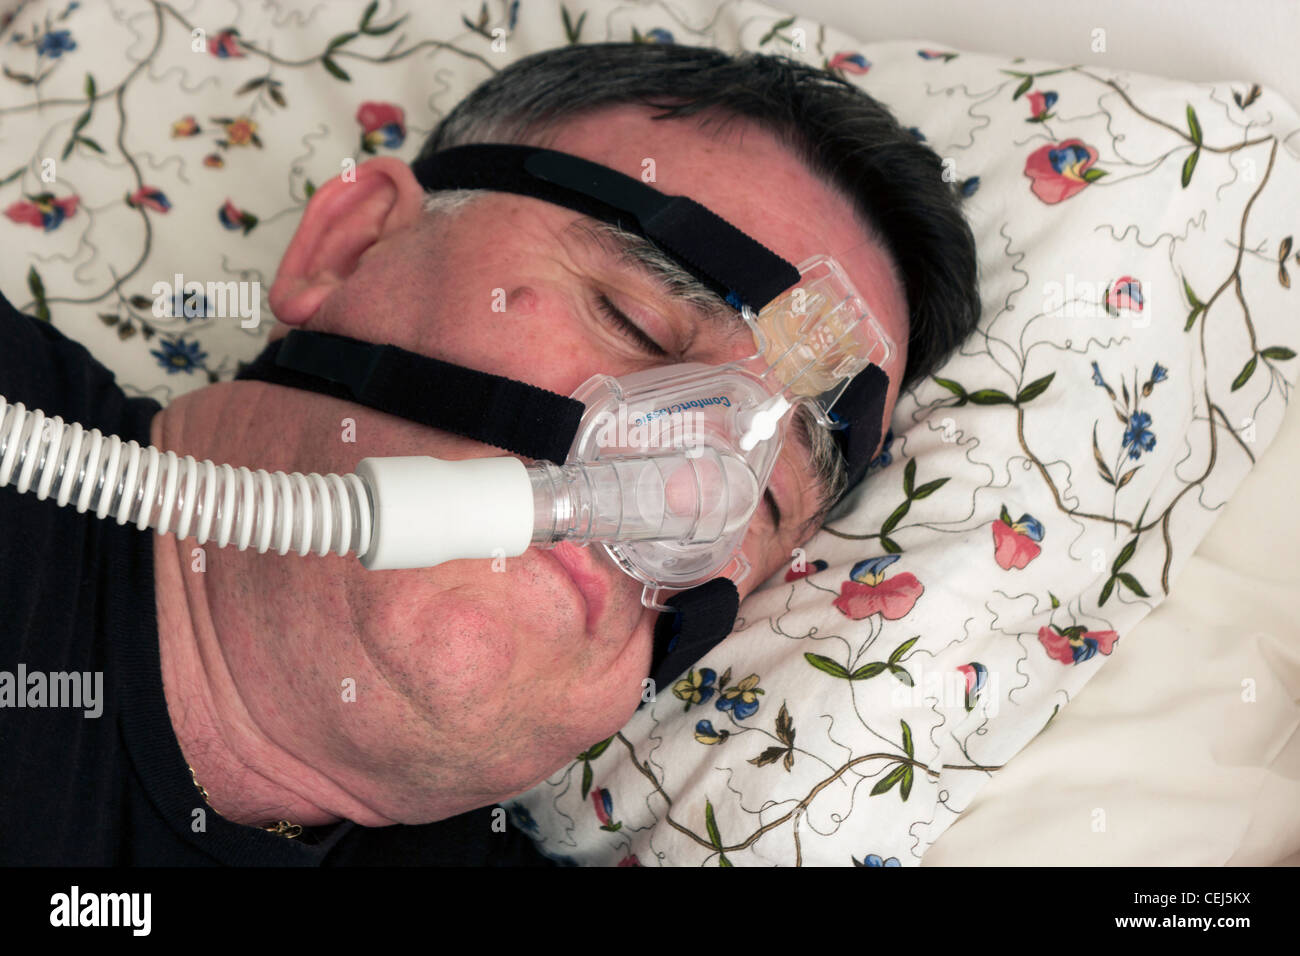 Man using a CPAP face mask and machine used for the treatment of sleep apnea. Stock Photo